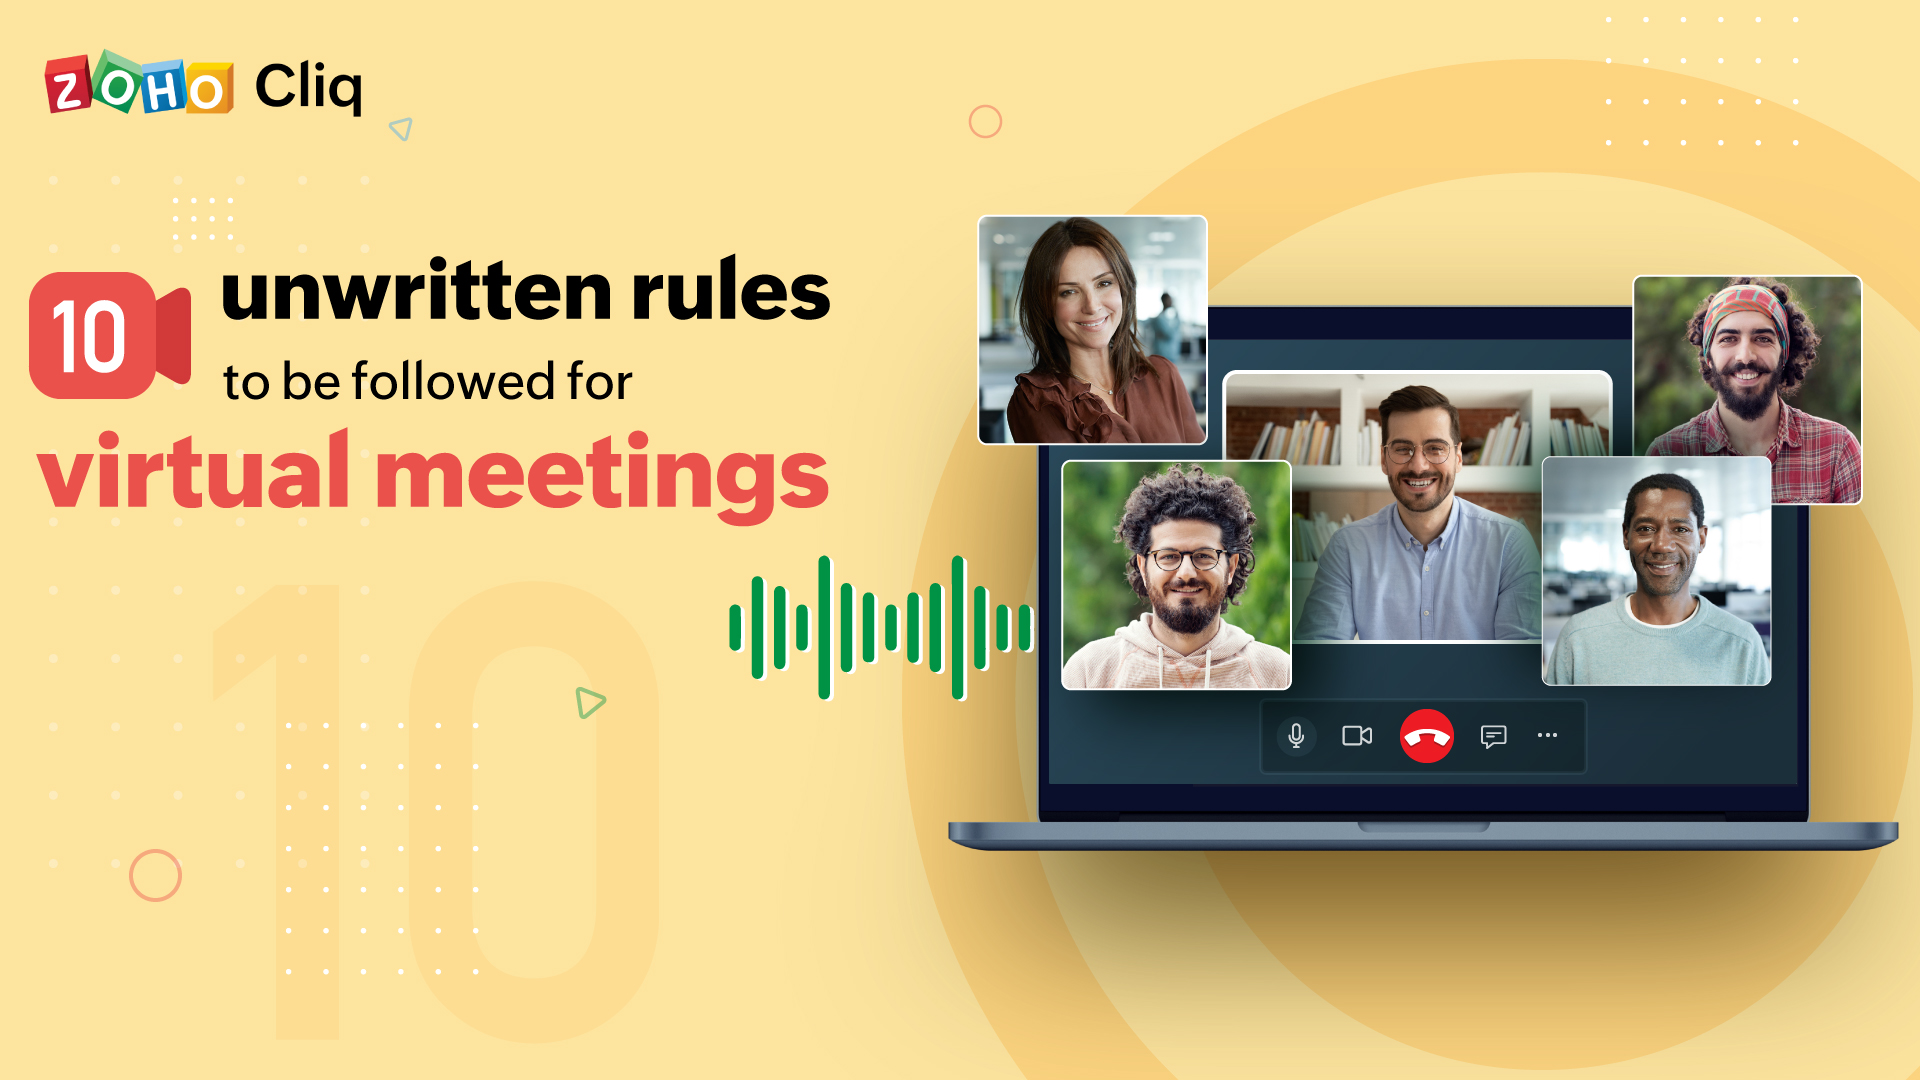 10 unwritten rules to be followed for virtual meetings